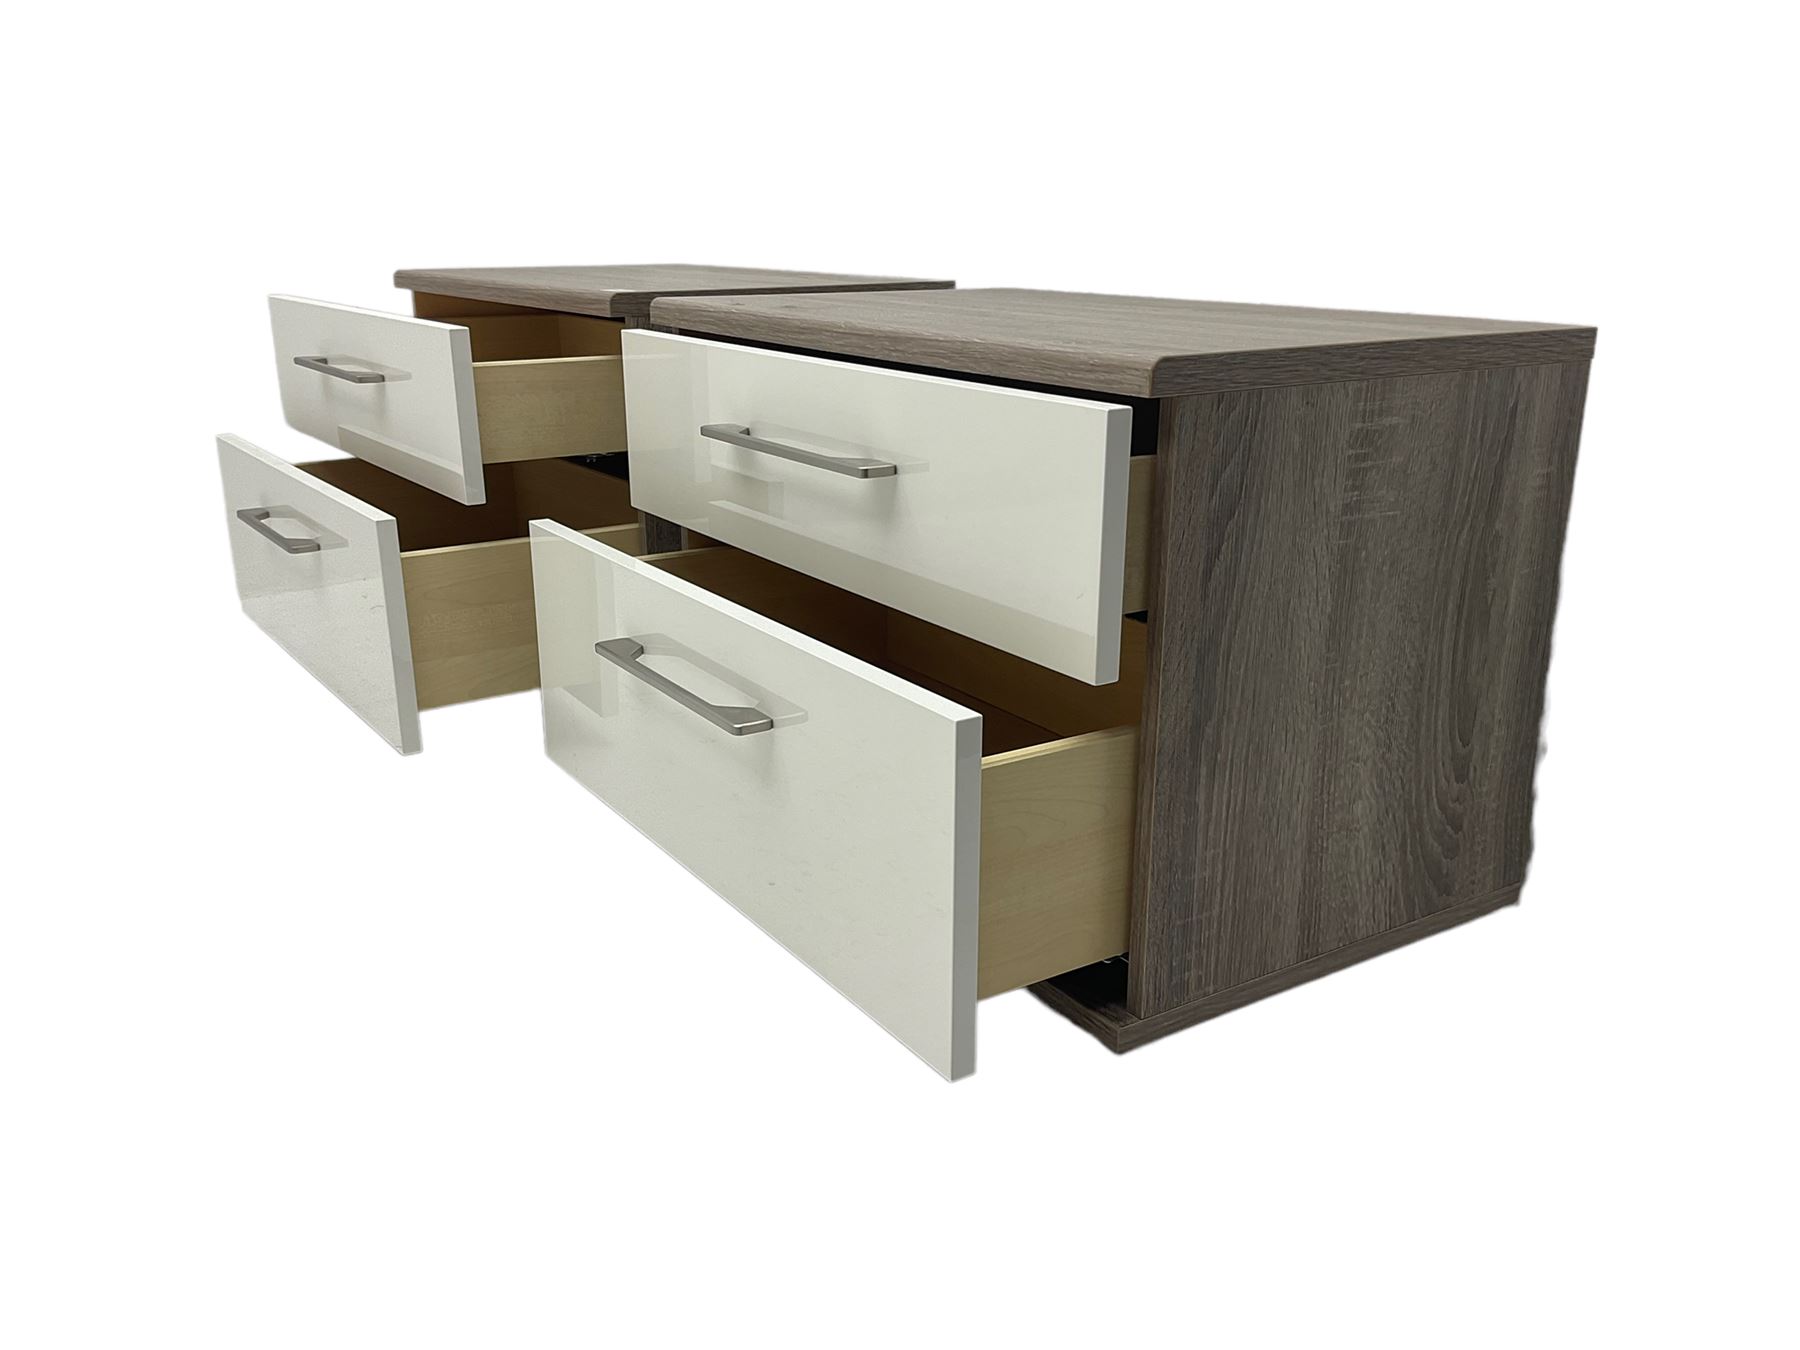 Pair of Loddenkemper 'Luna' two drawer bedside chests - Image 5 of 5